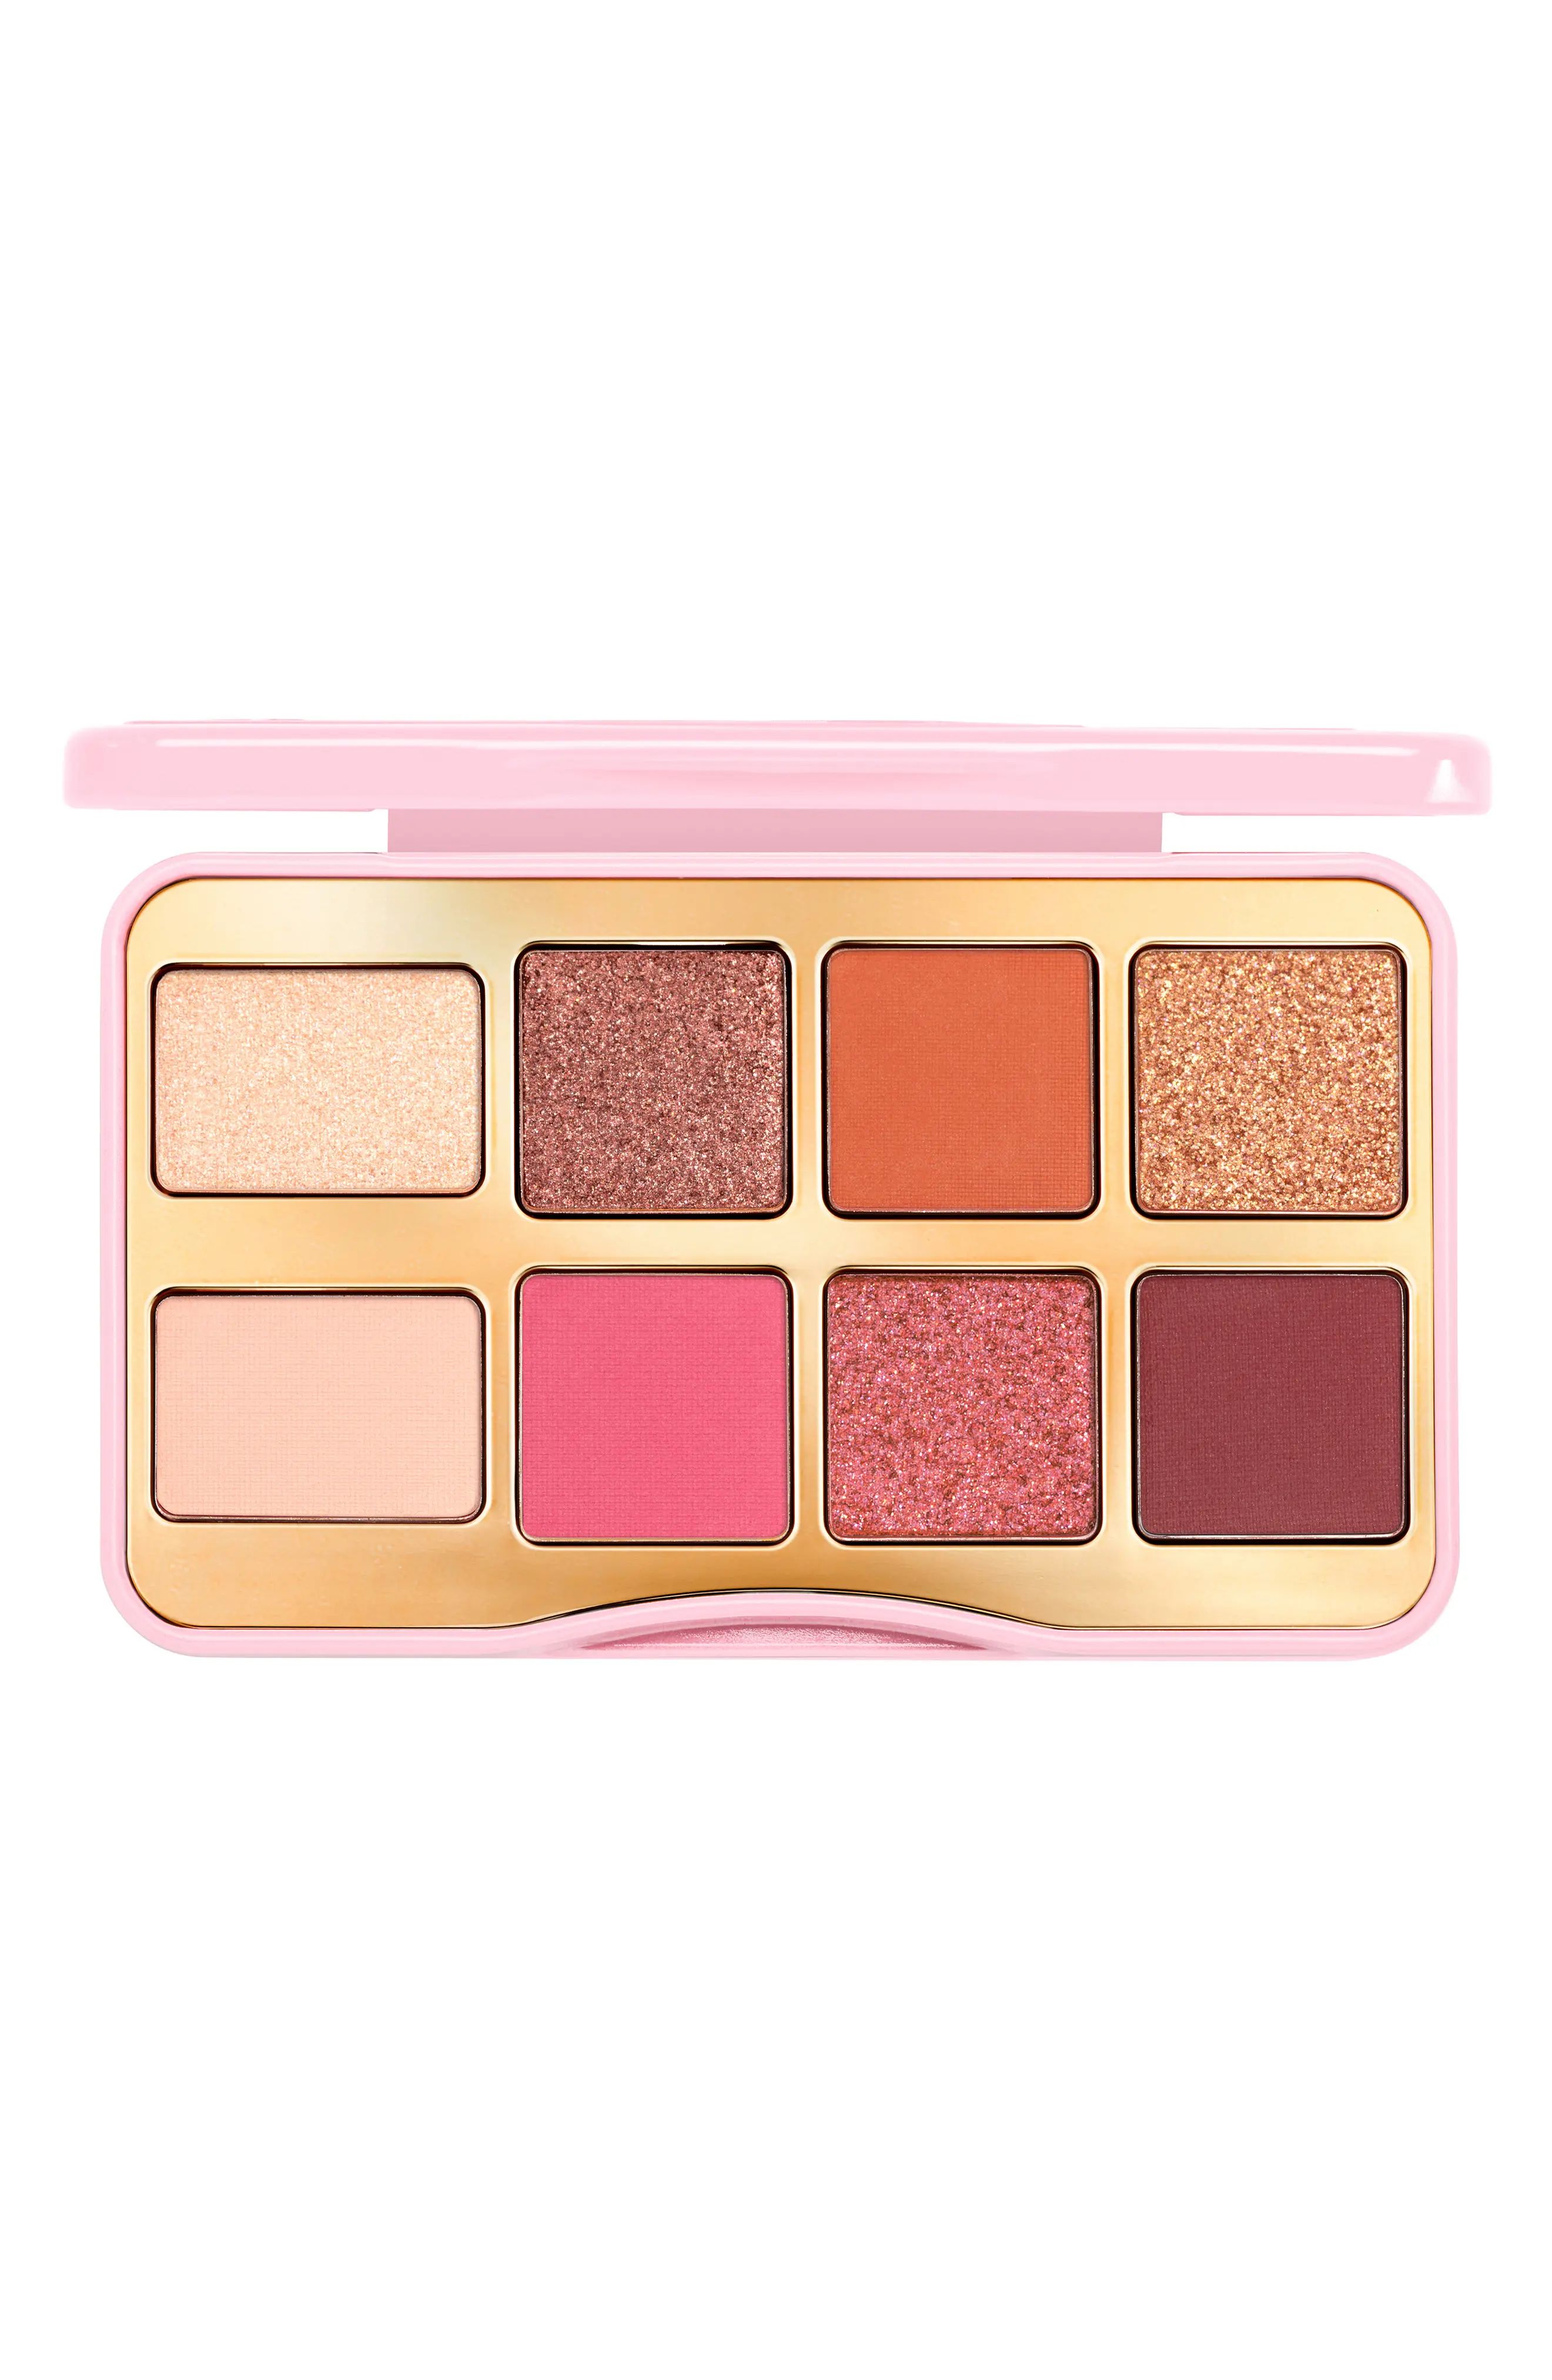 Too Faced Let's Play Mini Eyeshadow Palette - No Color | Nordstrom